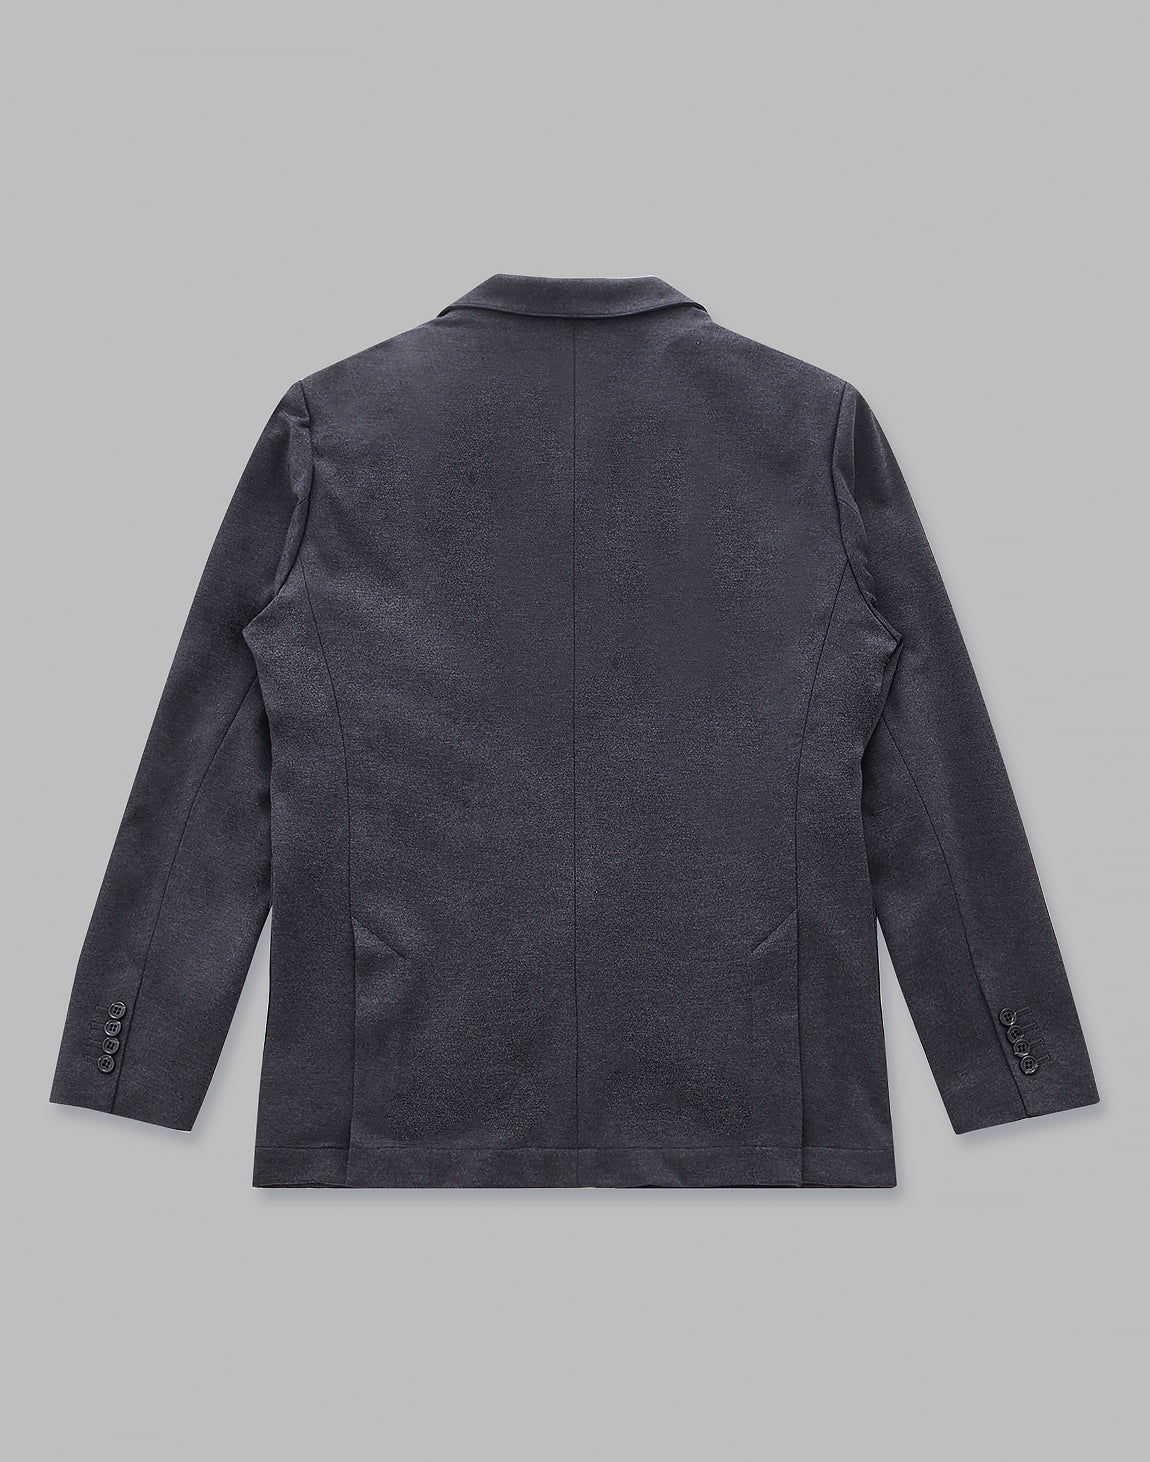 CRONOS BLACK STRETCH JACKET – クロノス CRONOS Official Store